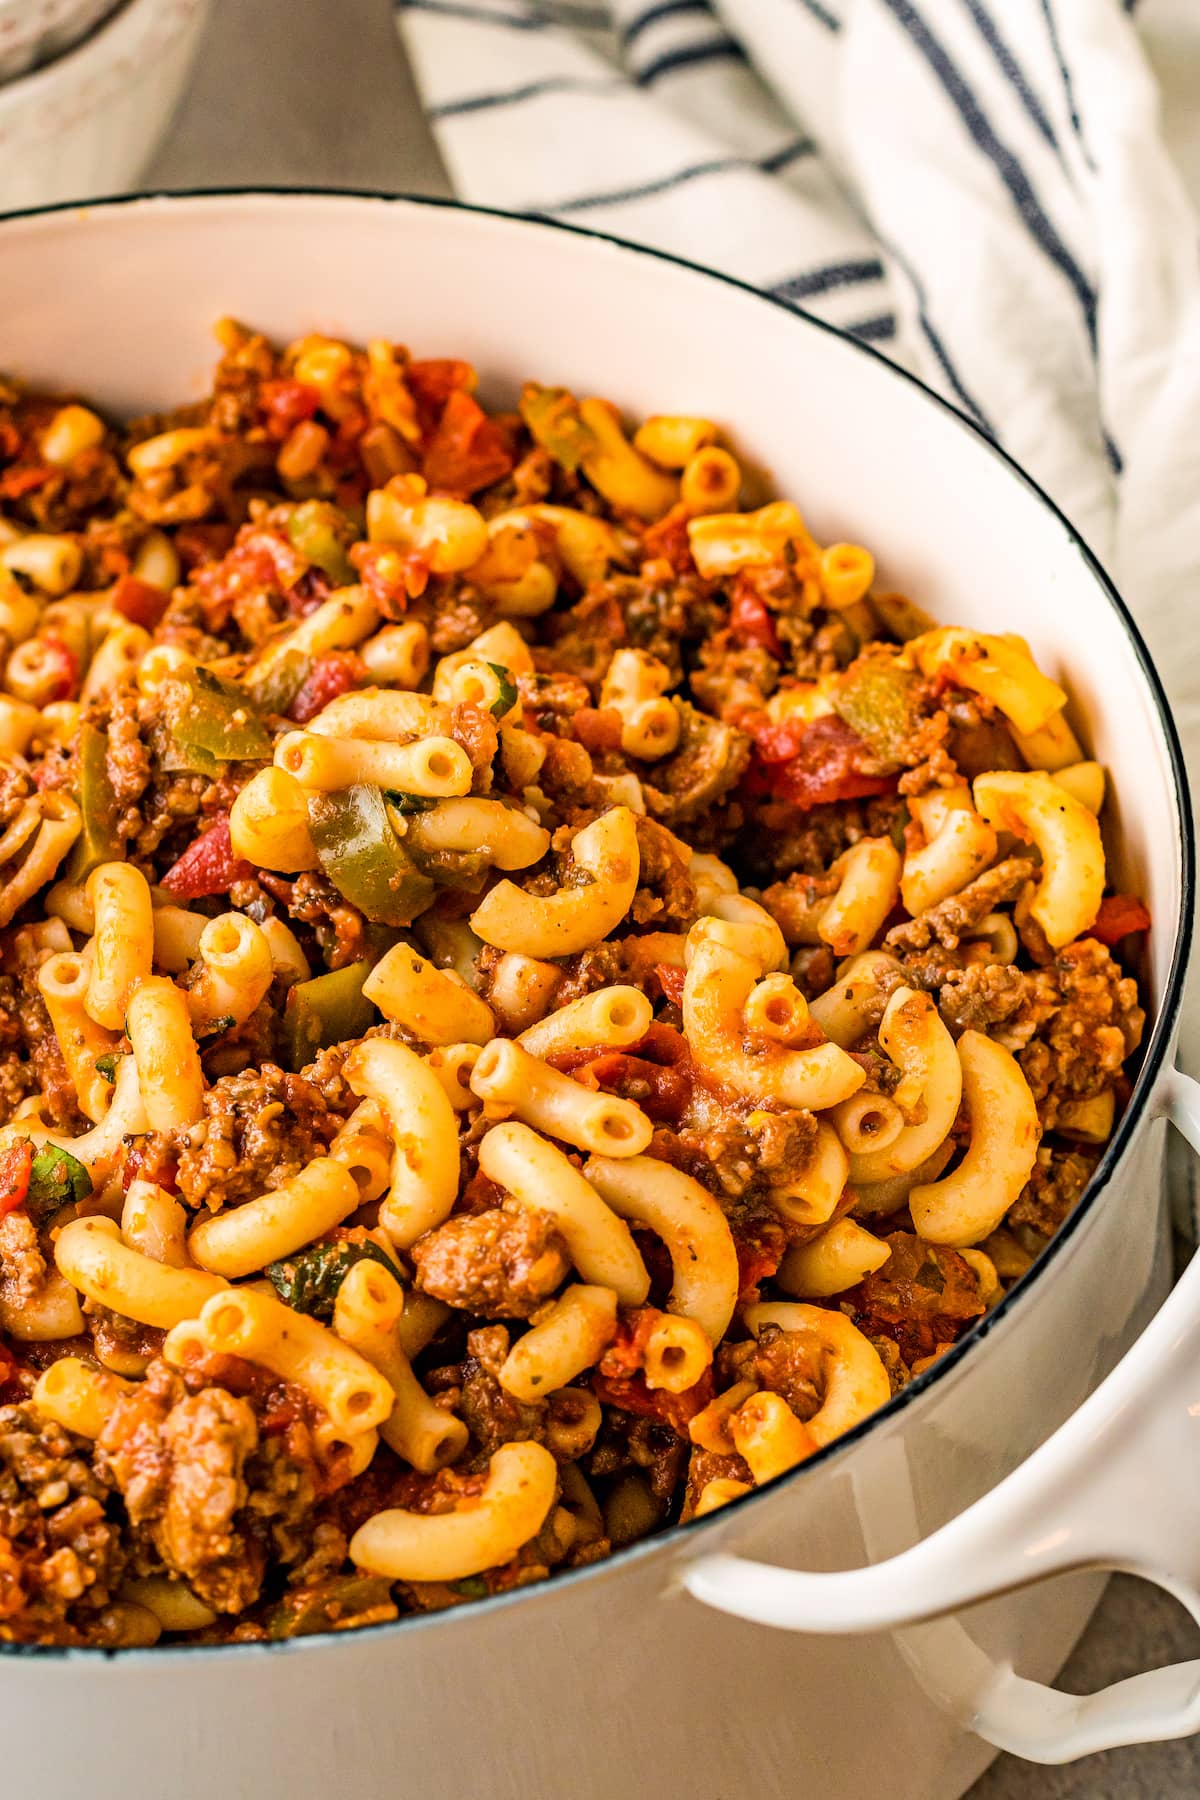 Close up of a pot filled with macaroni noodles, ground beef, and tomatoes.